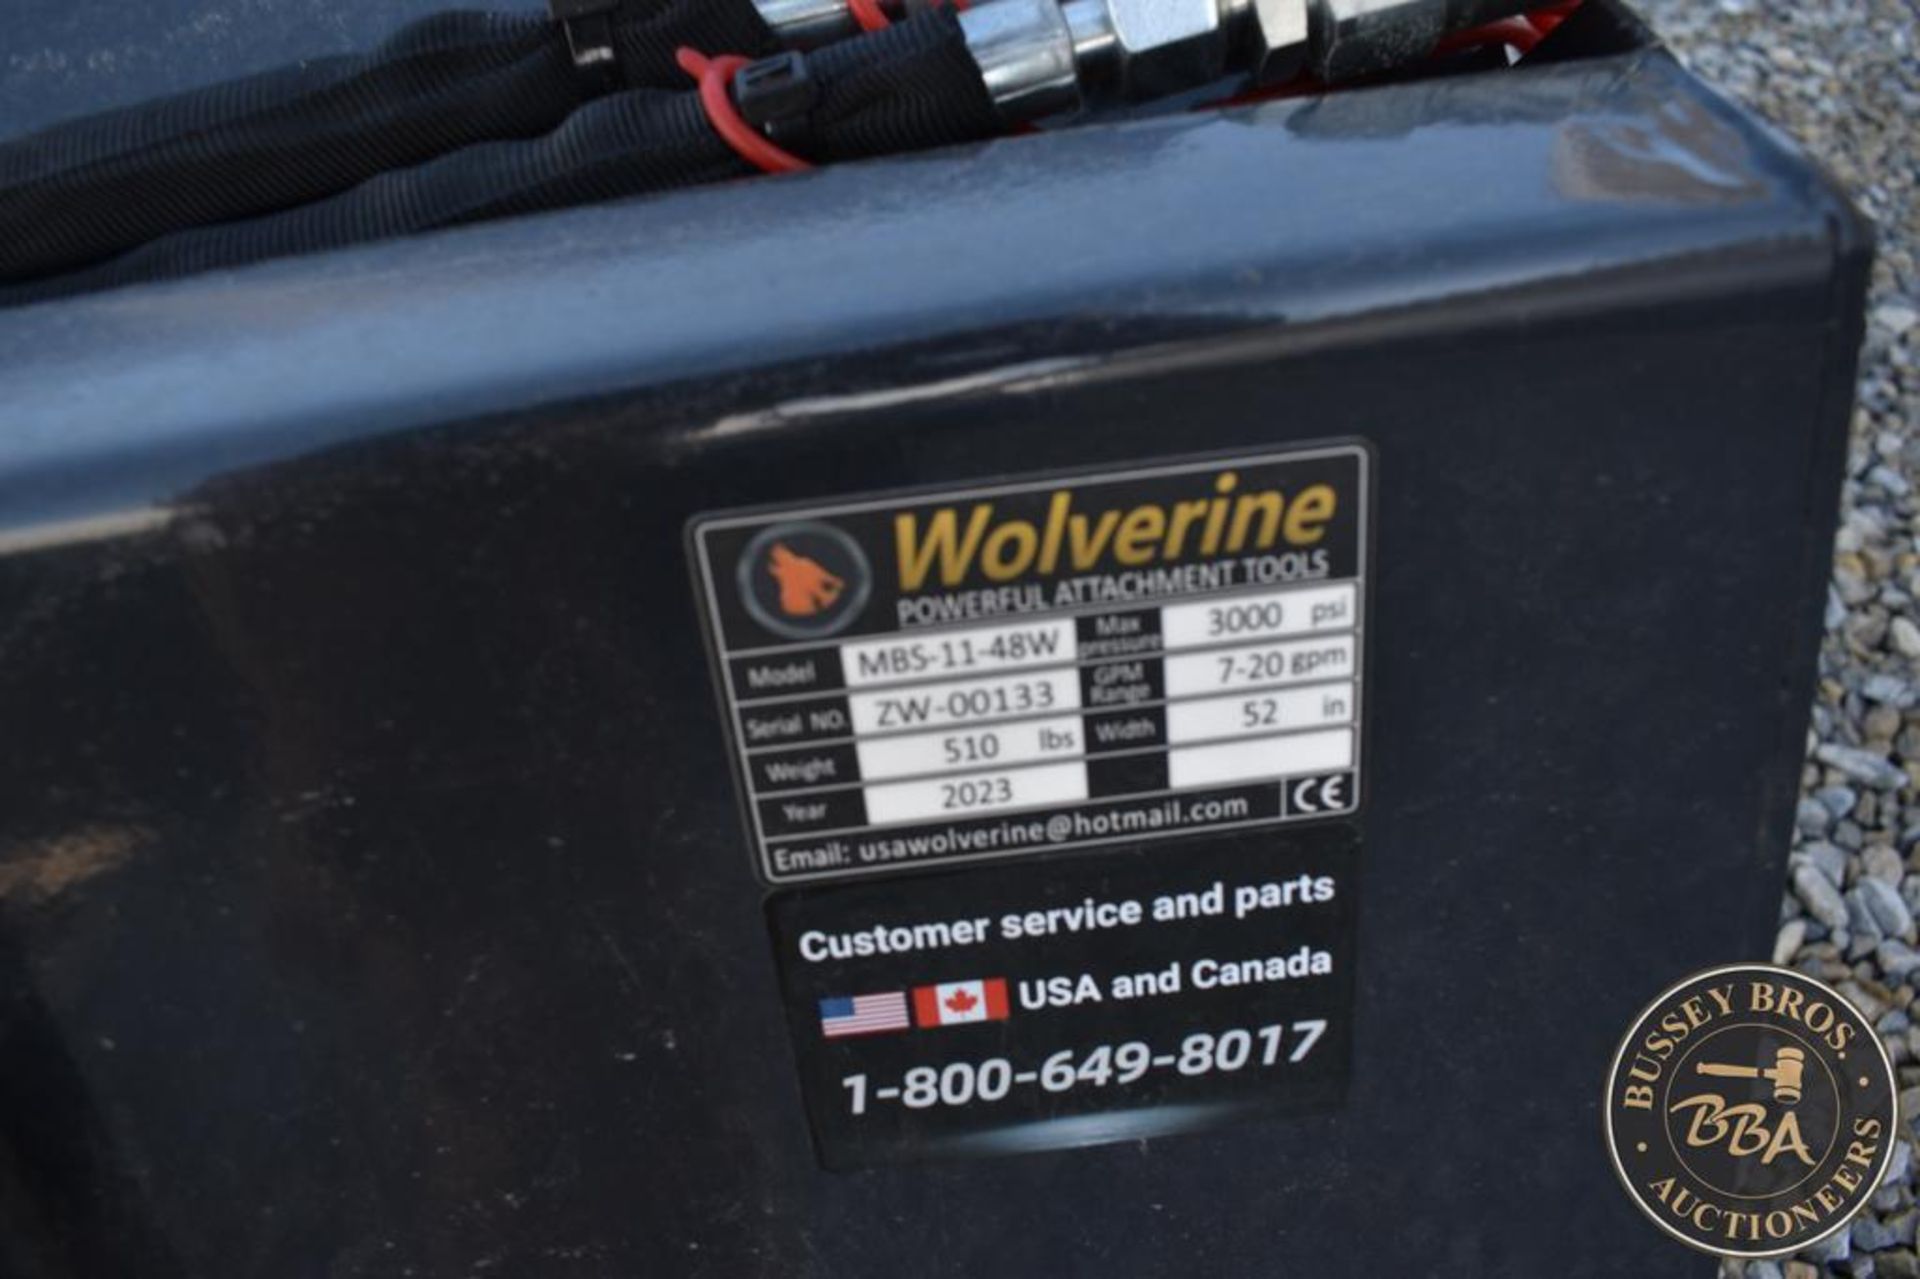 Sweeper WOLVERINE MBS-11-48W 24858 - Image 2 of 8